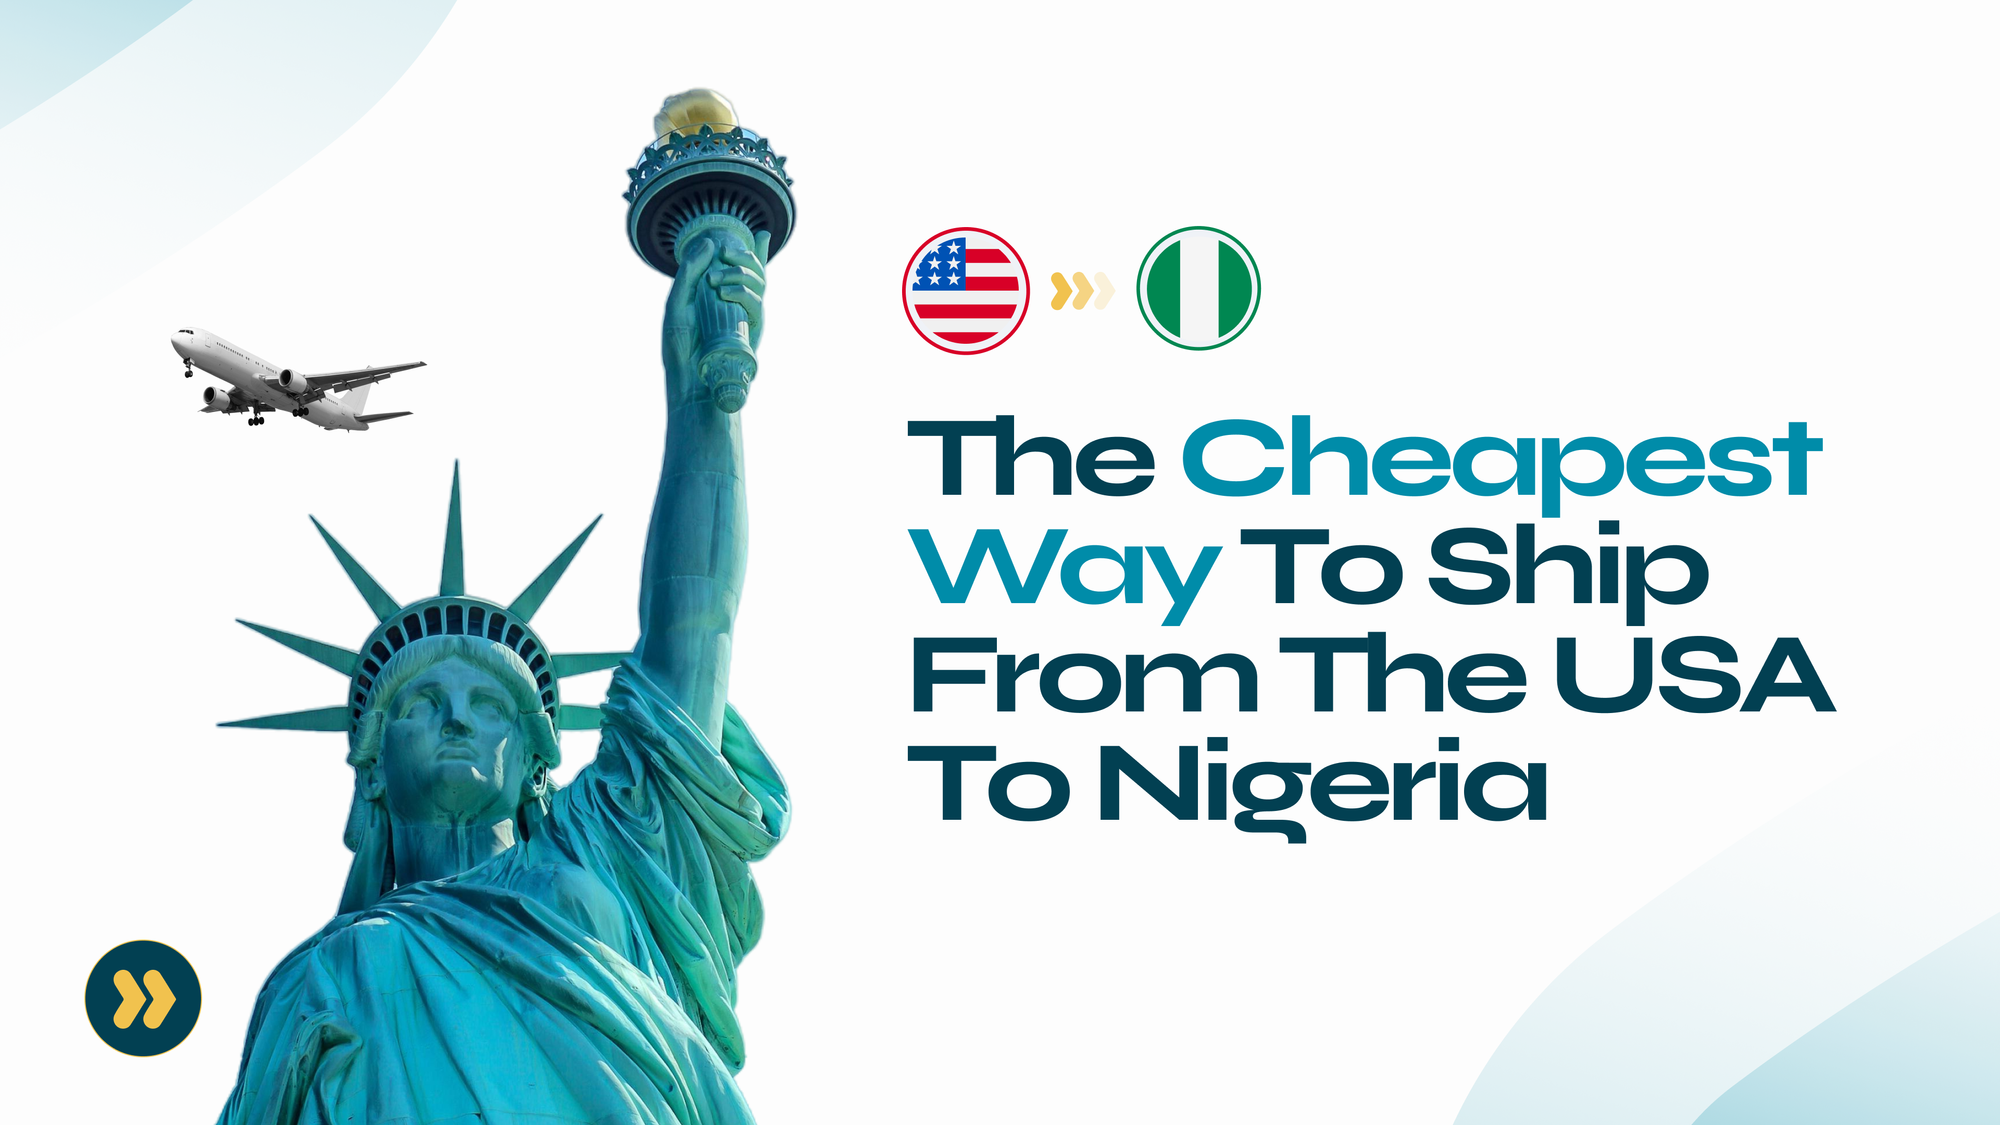 The Cheapest Way to Ship from the U.S. to Nigeria